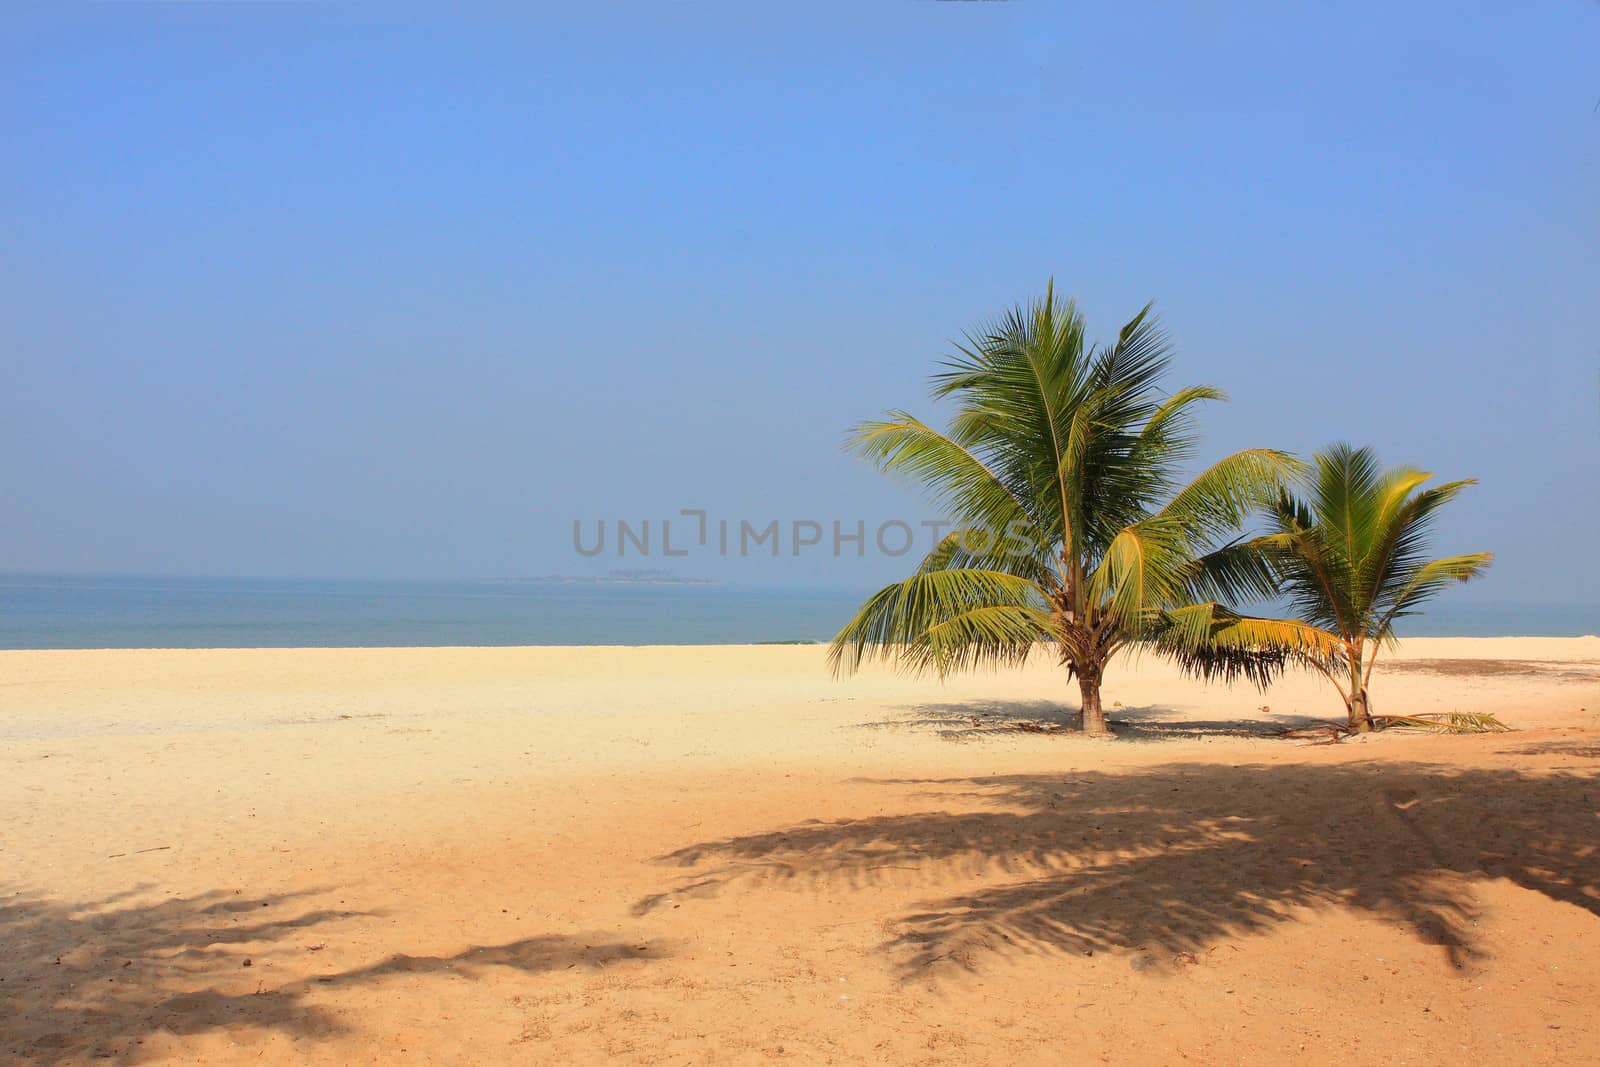 Ocean in India - a wild beach with palm trees